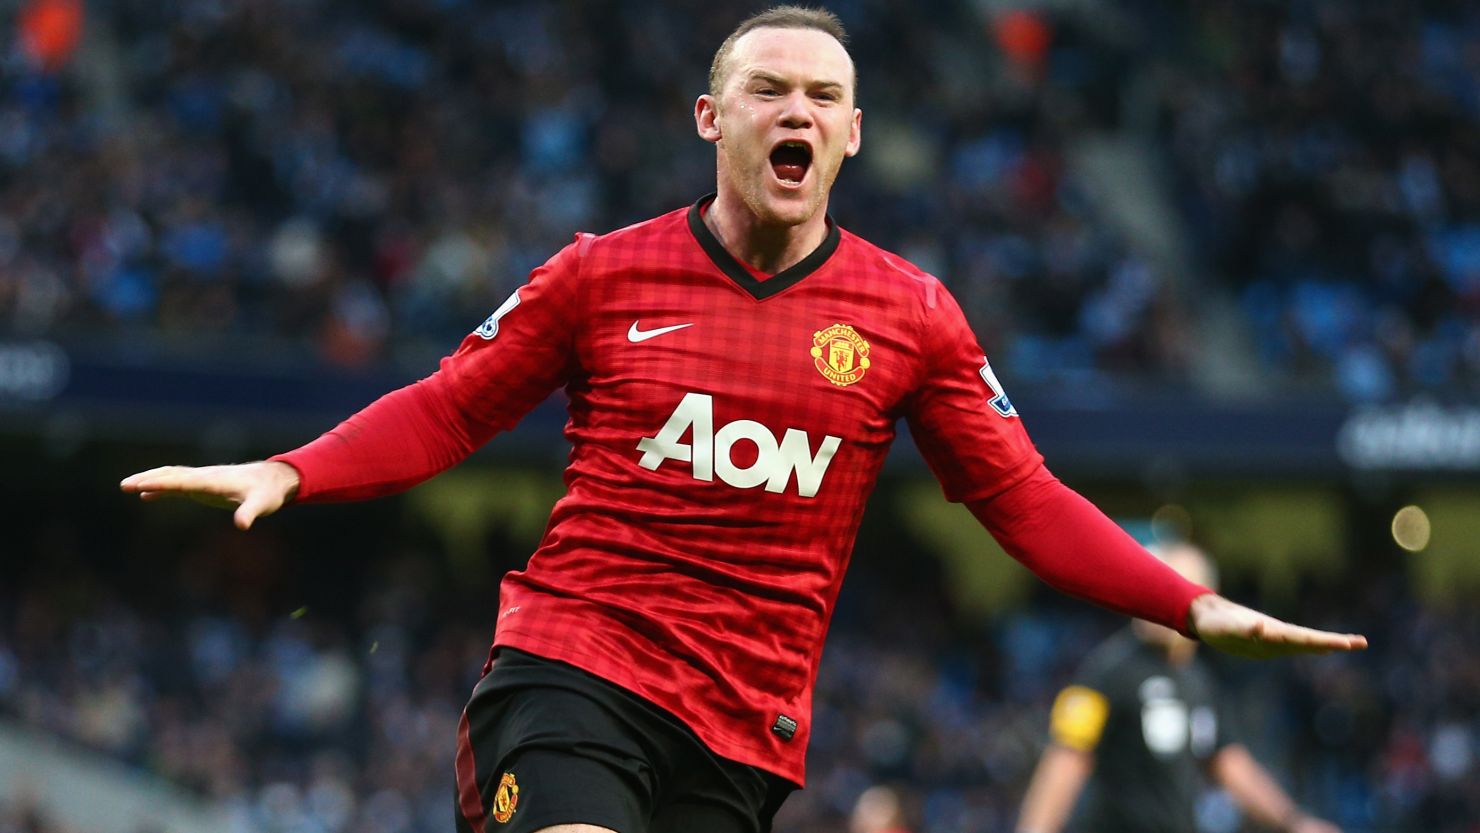 Wayne Rooney will not be leaving Old Trafford insisted his manager Alex Ferguson as he promised the striker would be at the club next season.